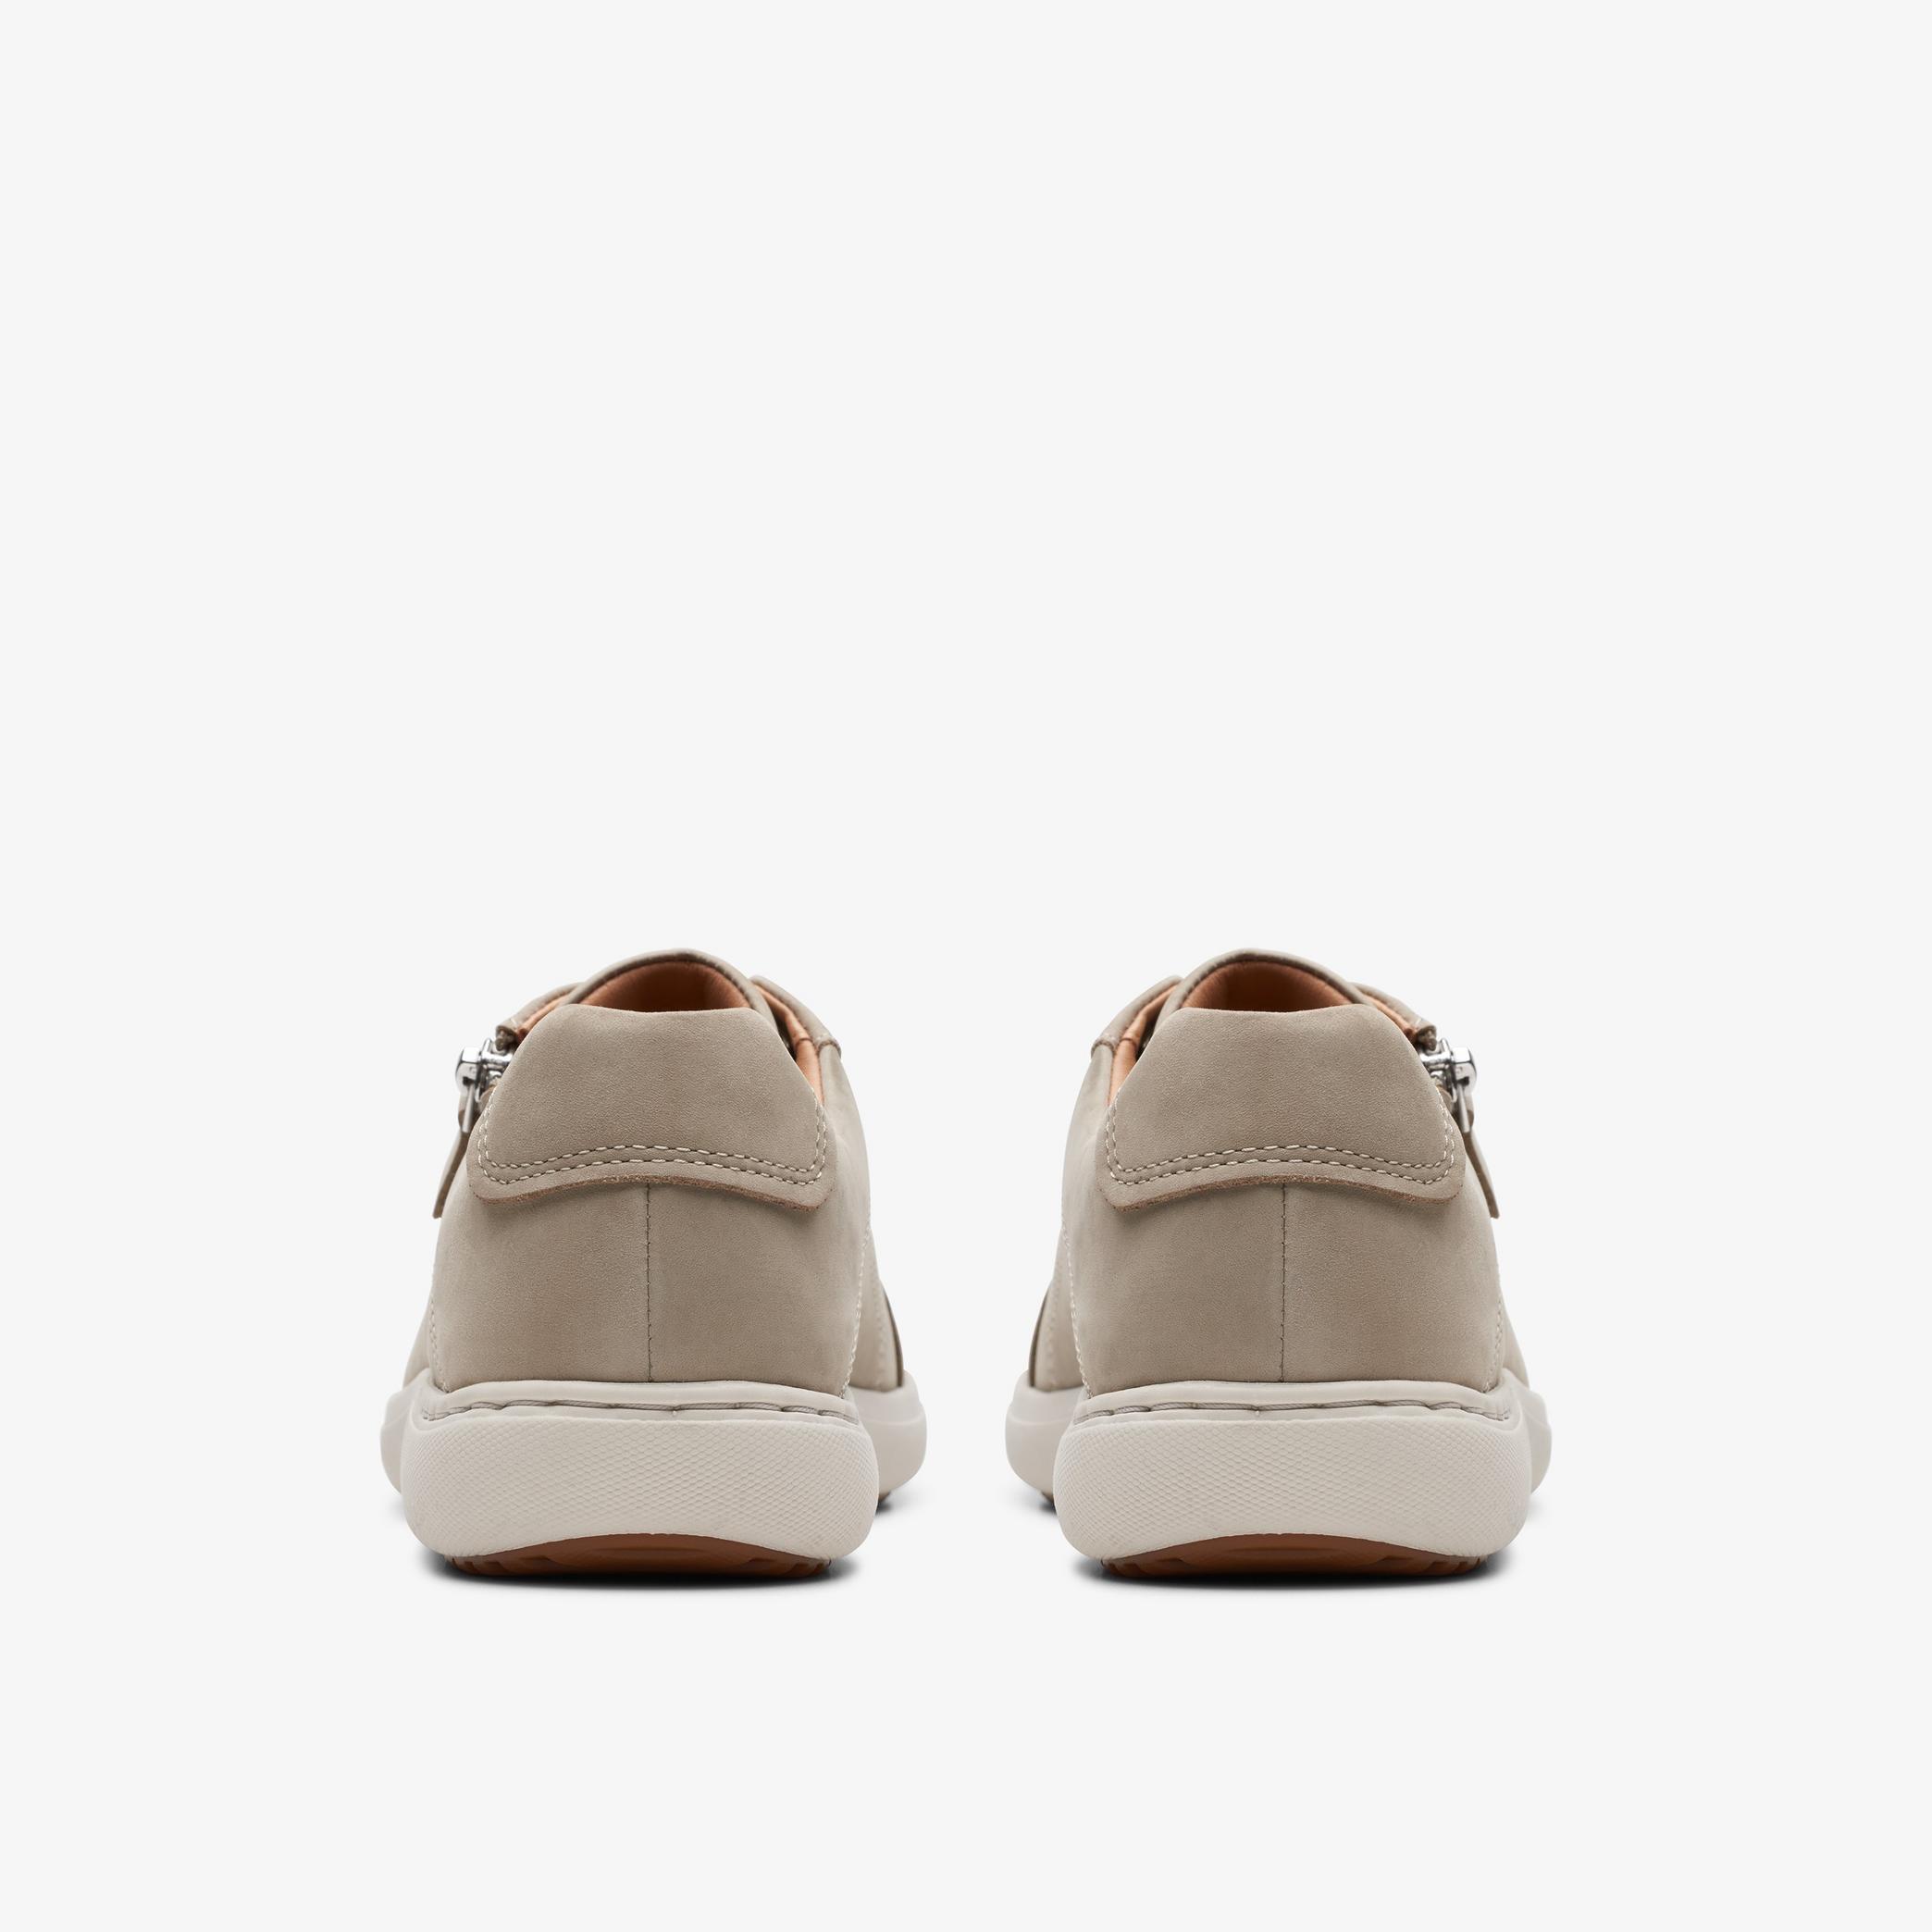 Nalle Lace Stone Nubuck Sneakers, view 5 of 7